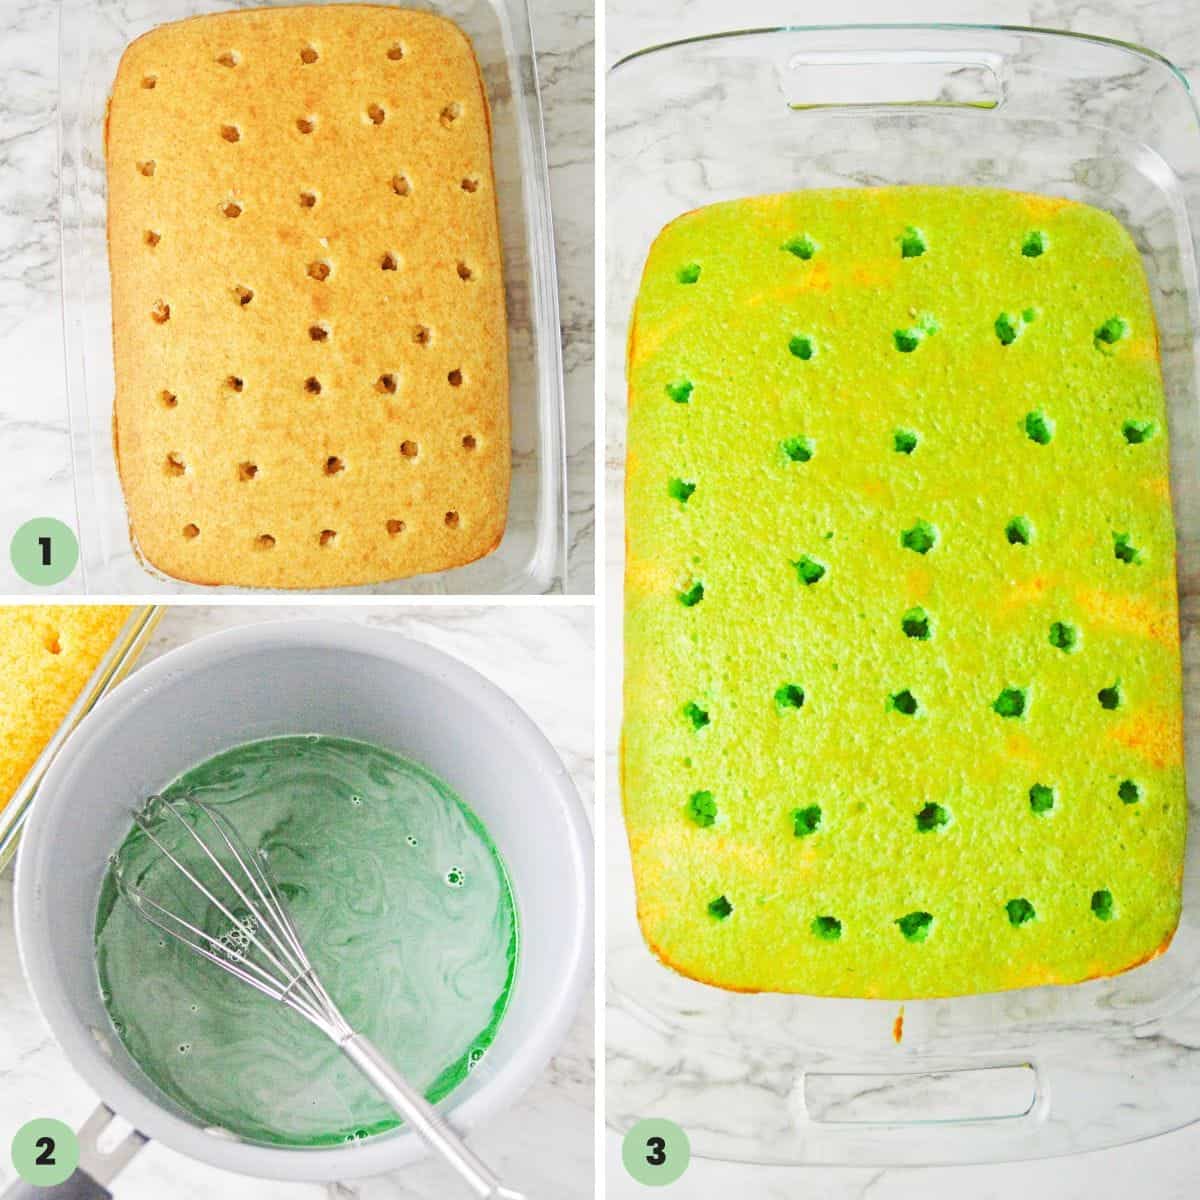 Collage of 3 images showing how to bake a white cake, poke it, and fill it with lime jello.